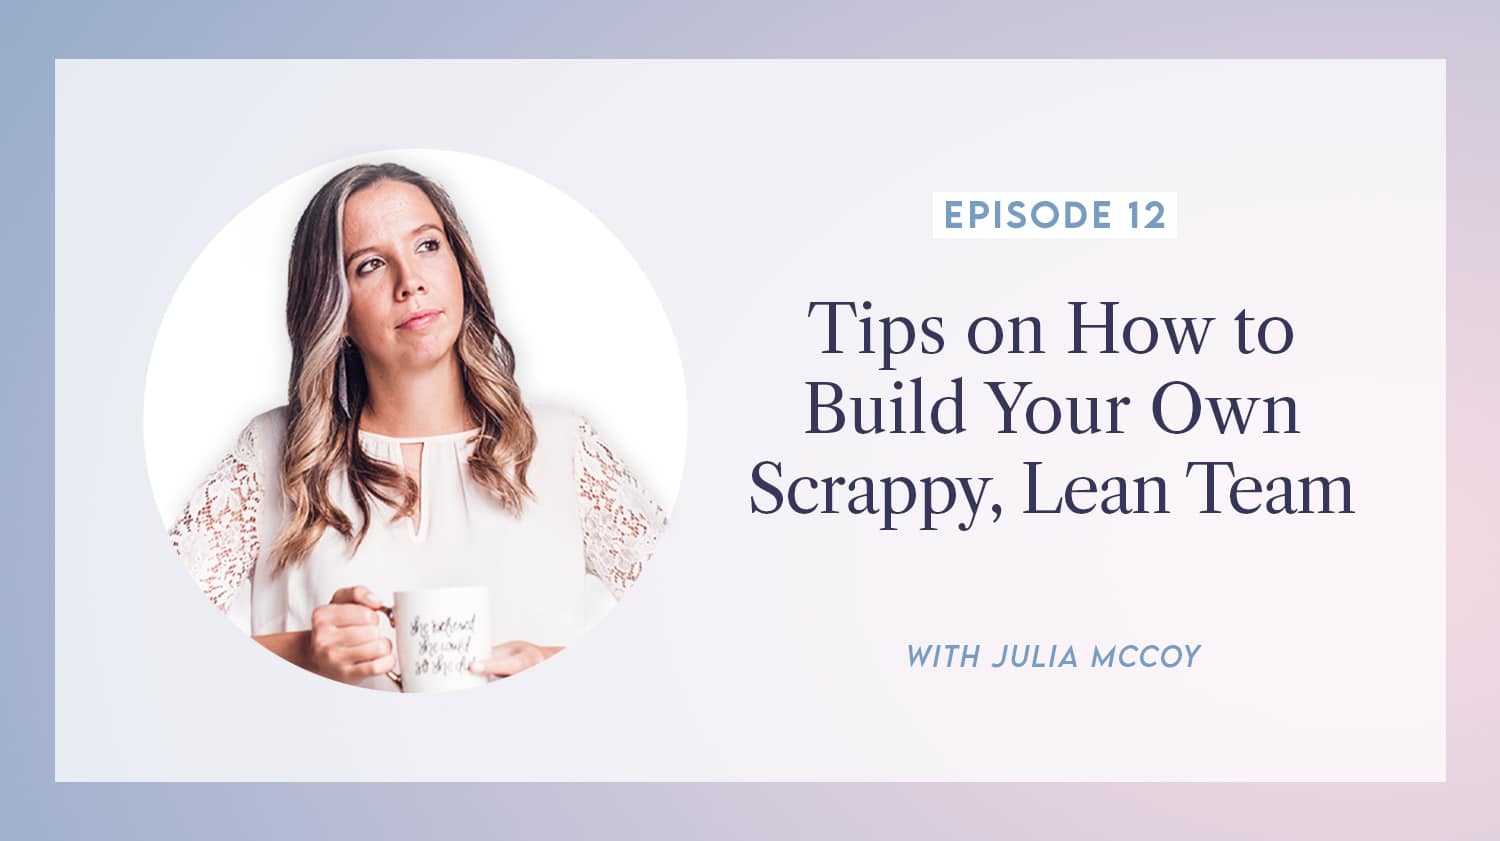 content transformation podcast with julia mccoy episode 12 tips on how to build your own scrappy, lean team